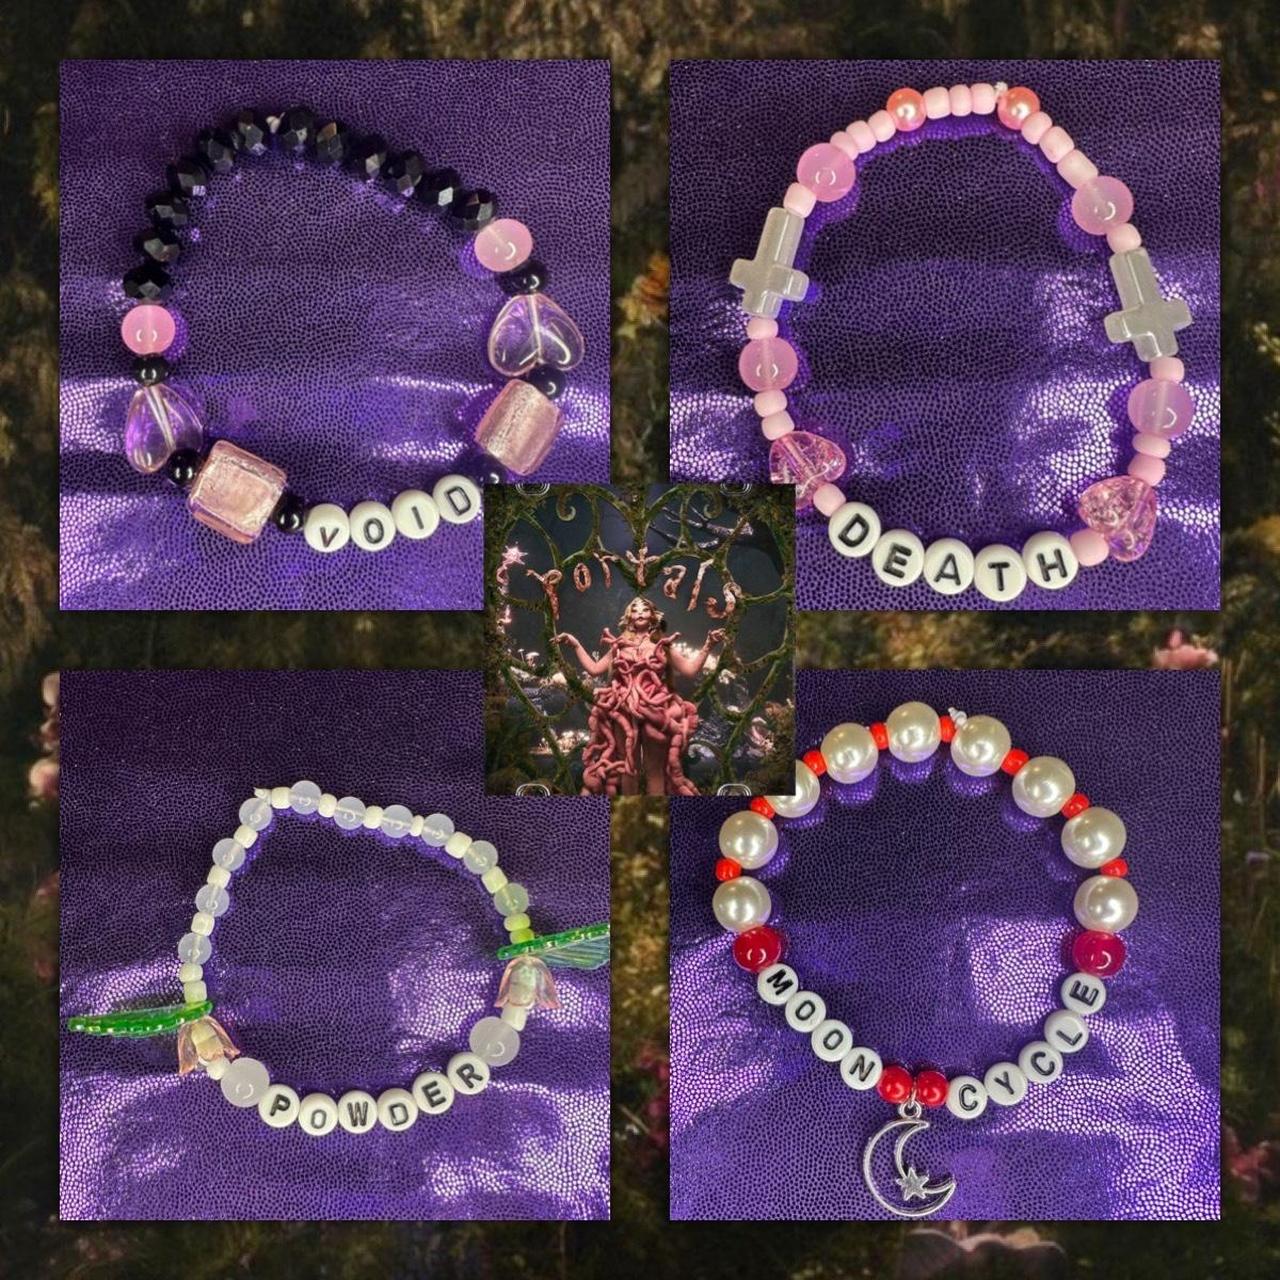 found some pretty beads for making kandi, thought i'd share! :  r/MelanieMartinez